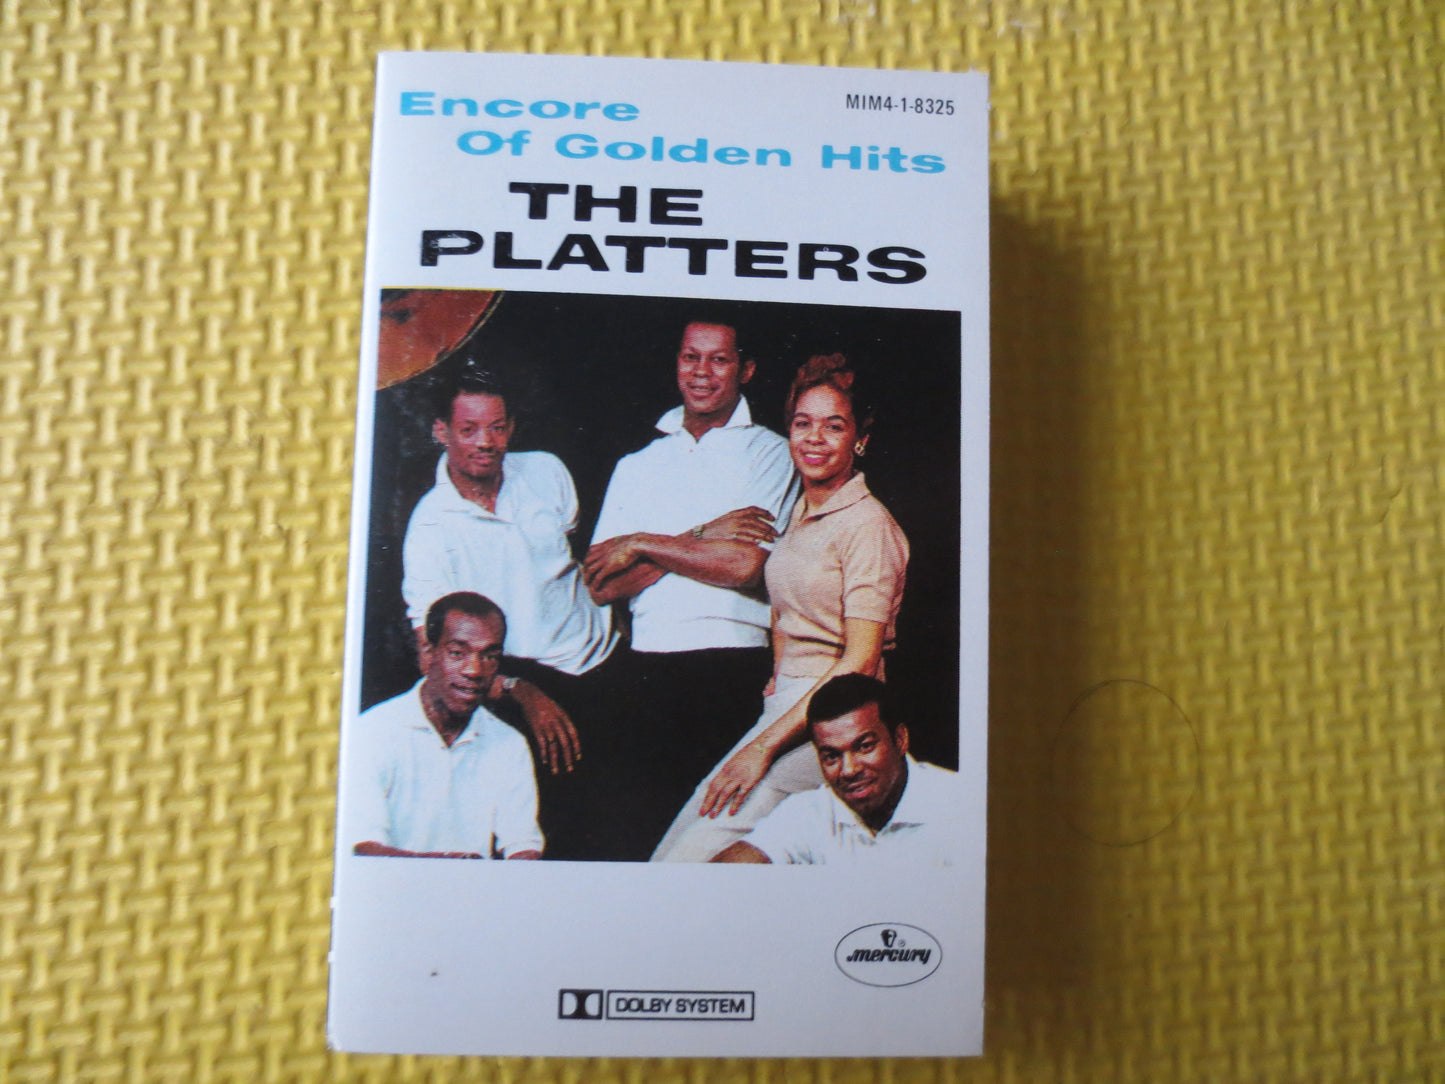 The PLATTERS, GOLDEN Hits, The Platters Tapes, Music Cassette, Music Tapes, Cassette Music, Cassettes, Tapes, 1973 Cassette